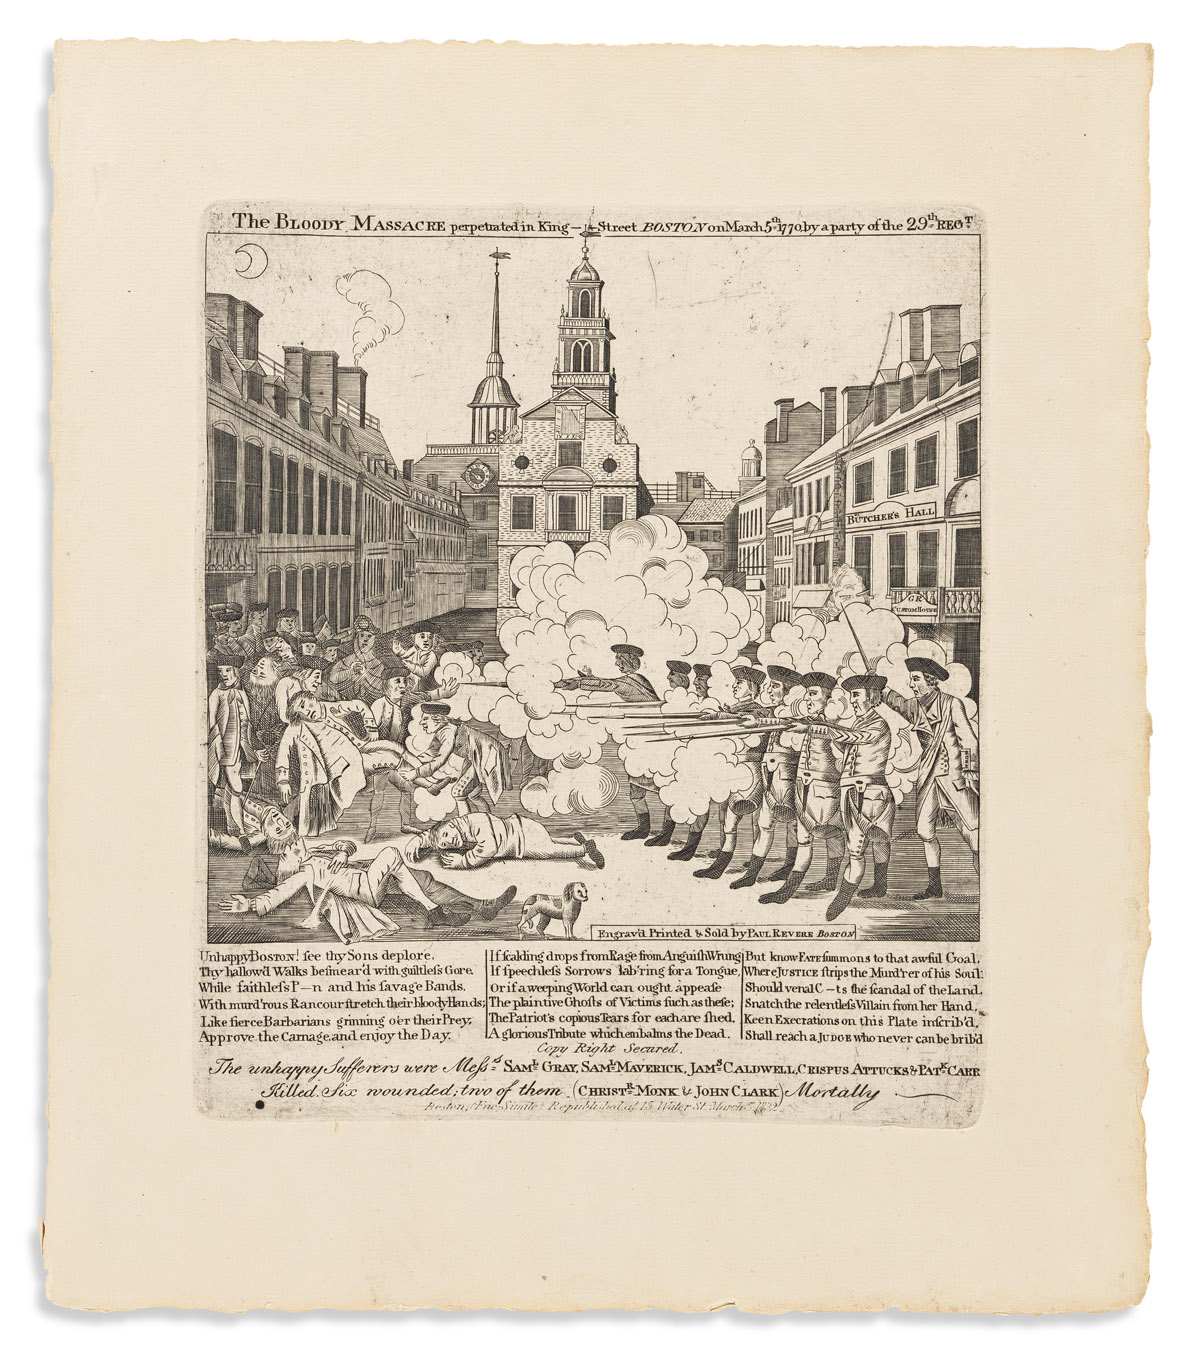 (AMERICAN REVOLUTION--PRELUDE.) [Stratton]; after Paul Revere. The Bloody Massacre Perpetrated in King-Street, Boston.